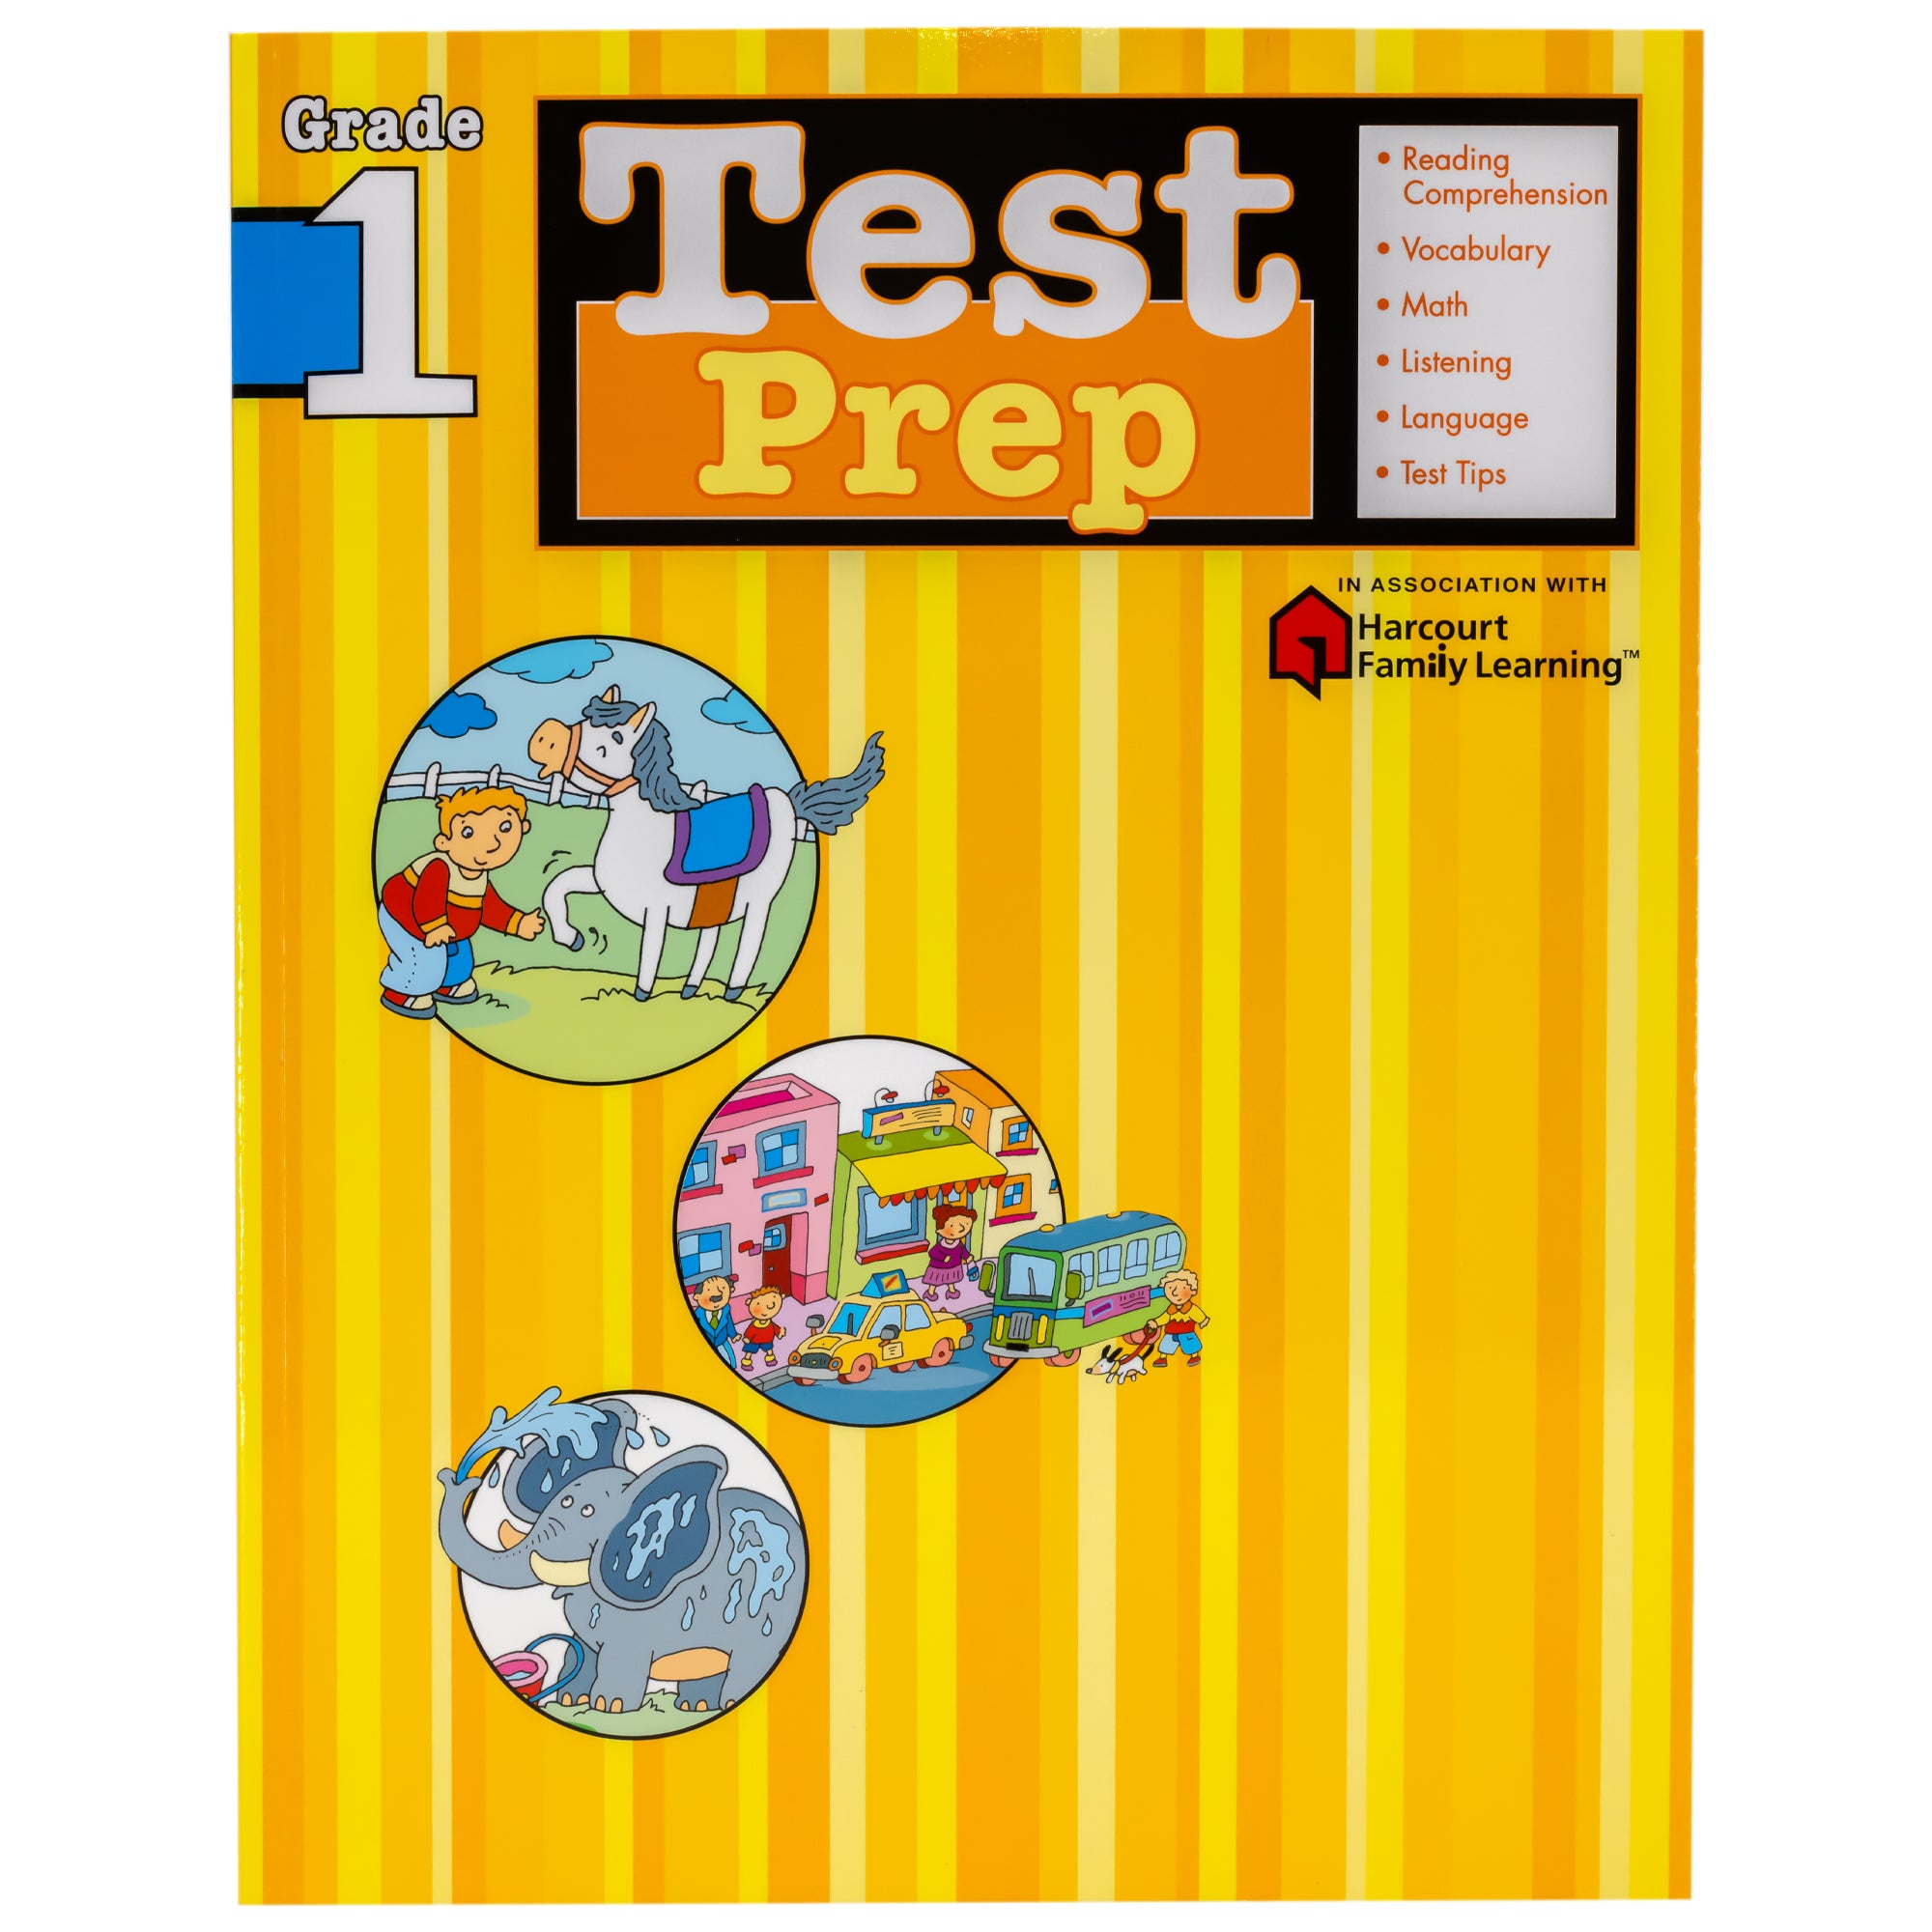 Test Prep Grade 1 book. The background is striped with different shades of yellow. The title at the top is next to a list of items covered in the book, including; Reading Comprehension, Vocabulary, Math, Listening, Language, and Test Tips. Below and to the left are 3 illustrations in circle frames. The top one is of a boy with a horse, the middle and slightly right is a street with town building and a bus, and the bottom is of an elephant washing itself.